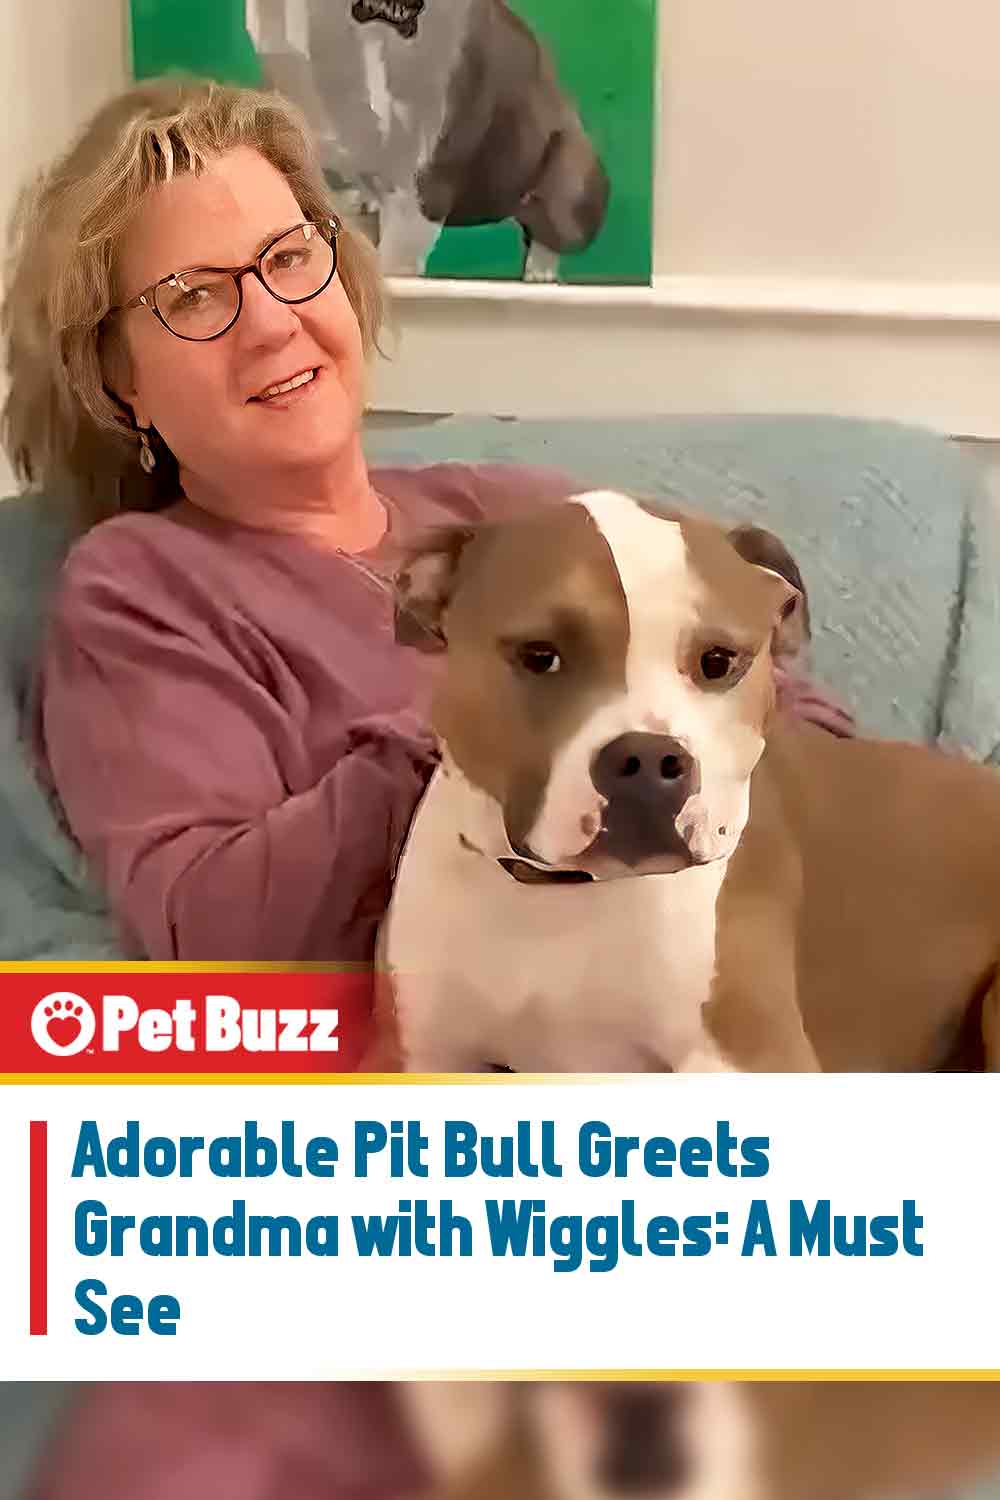 Adorable Pit Bull Greets Grandma with Wiggles: A Must See